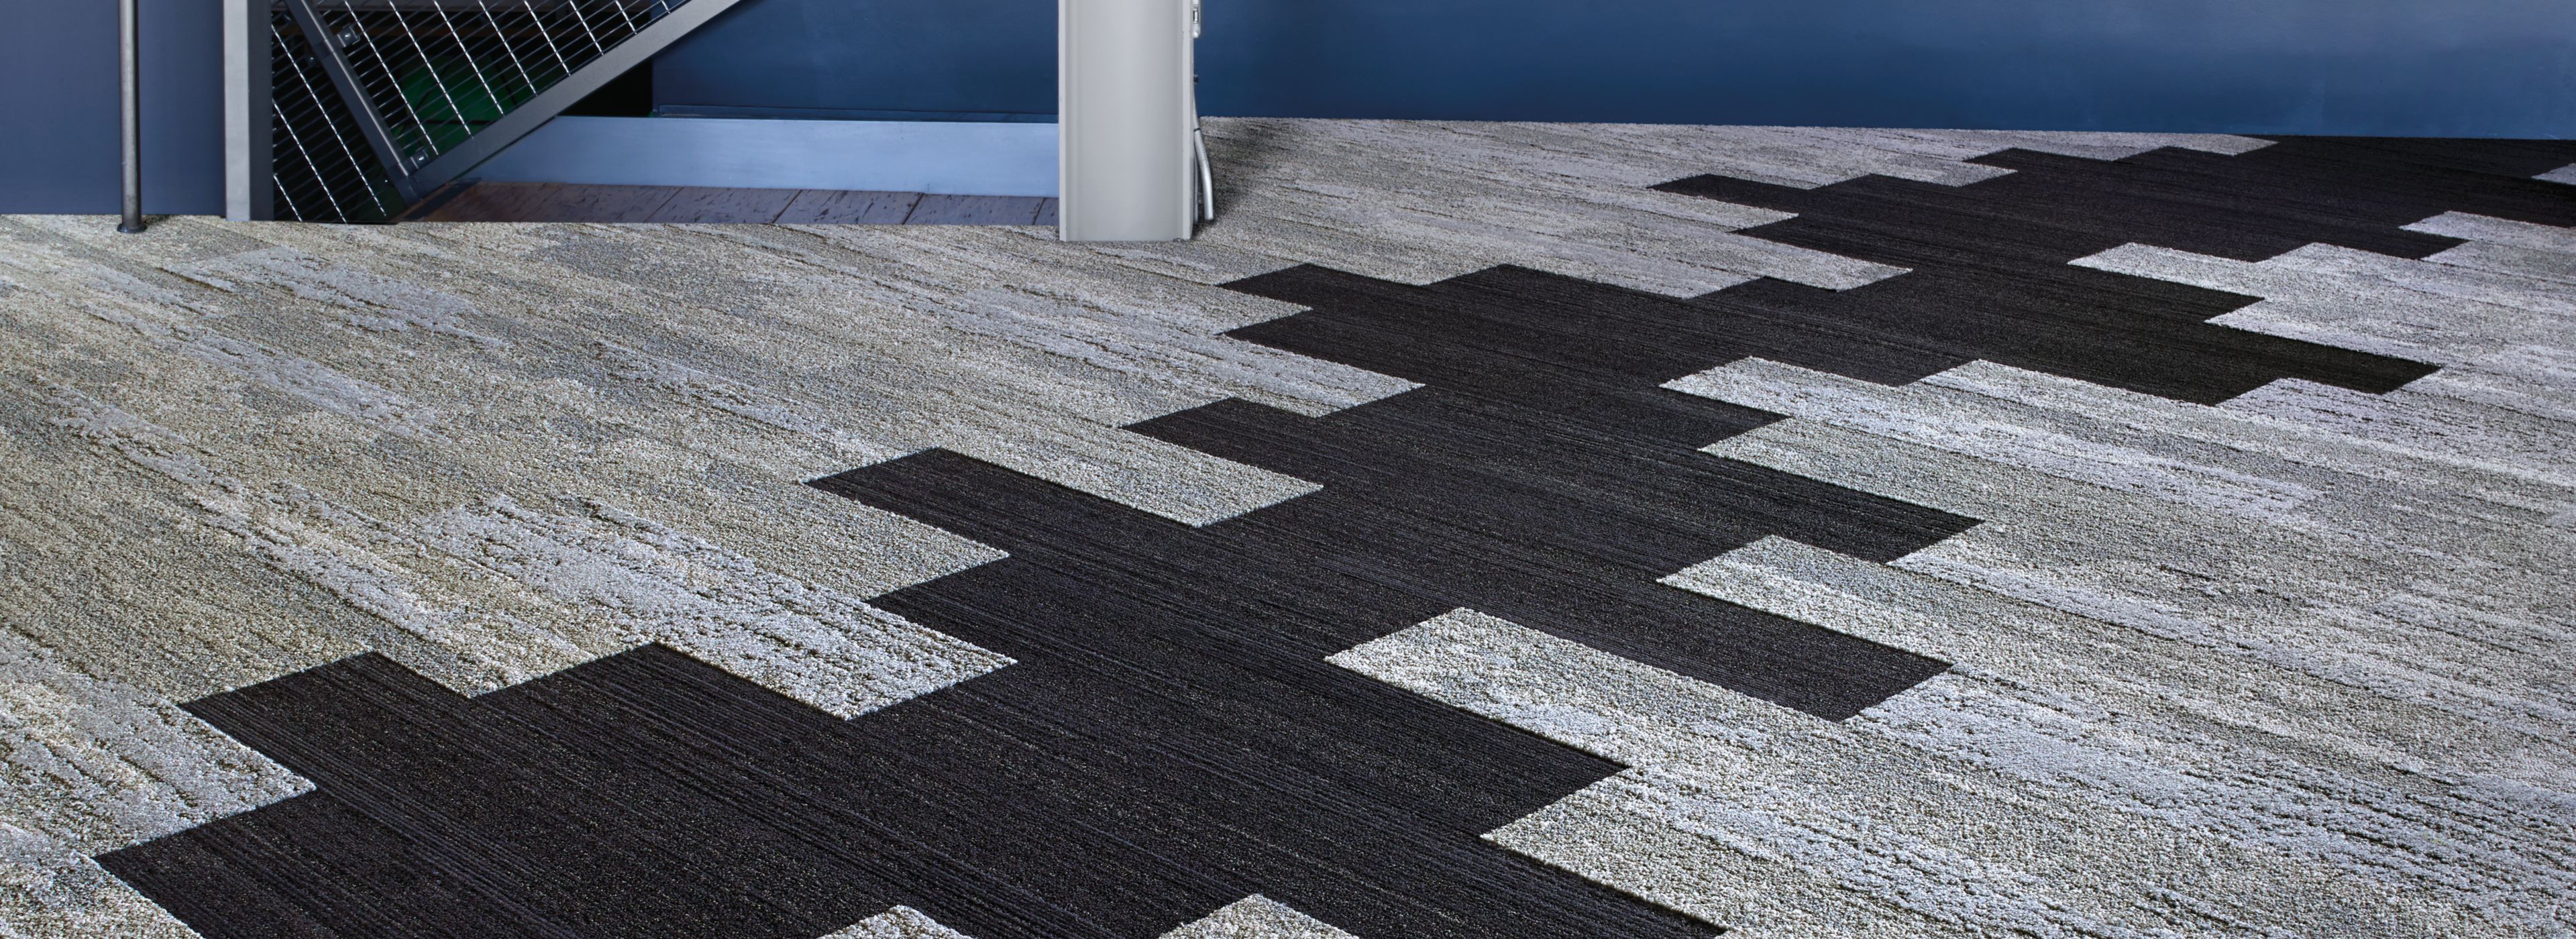 Interface NF400 and NF401 plank carpet tile in a corridor or entryway of a public space numéro d’image 1